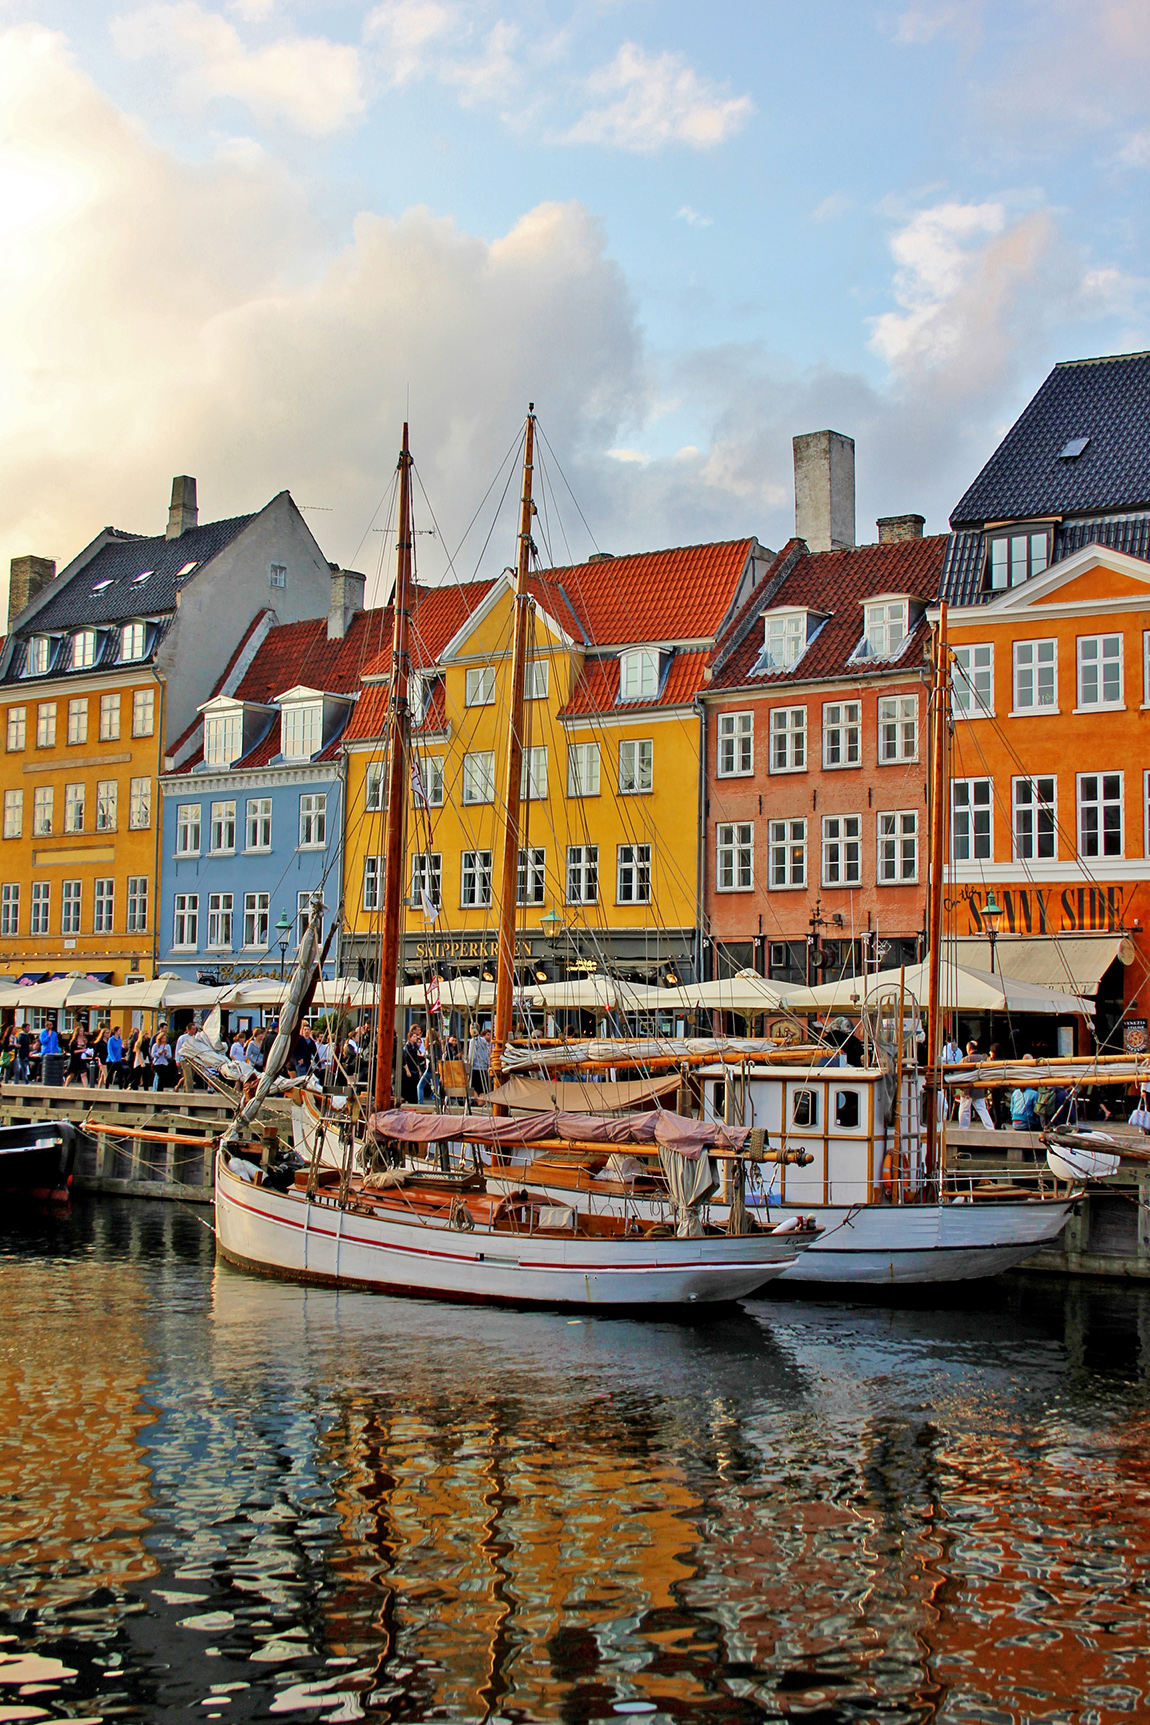 The beautiful and colourful city of Copenhagen